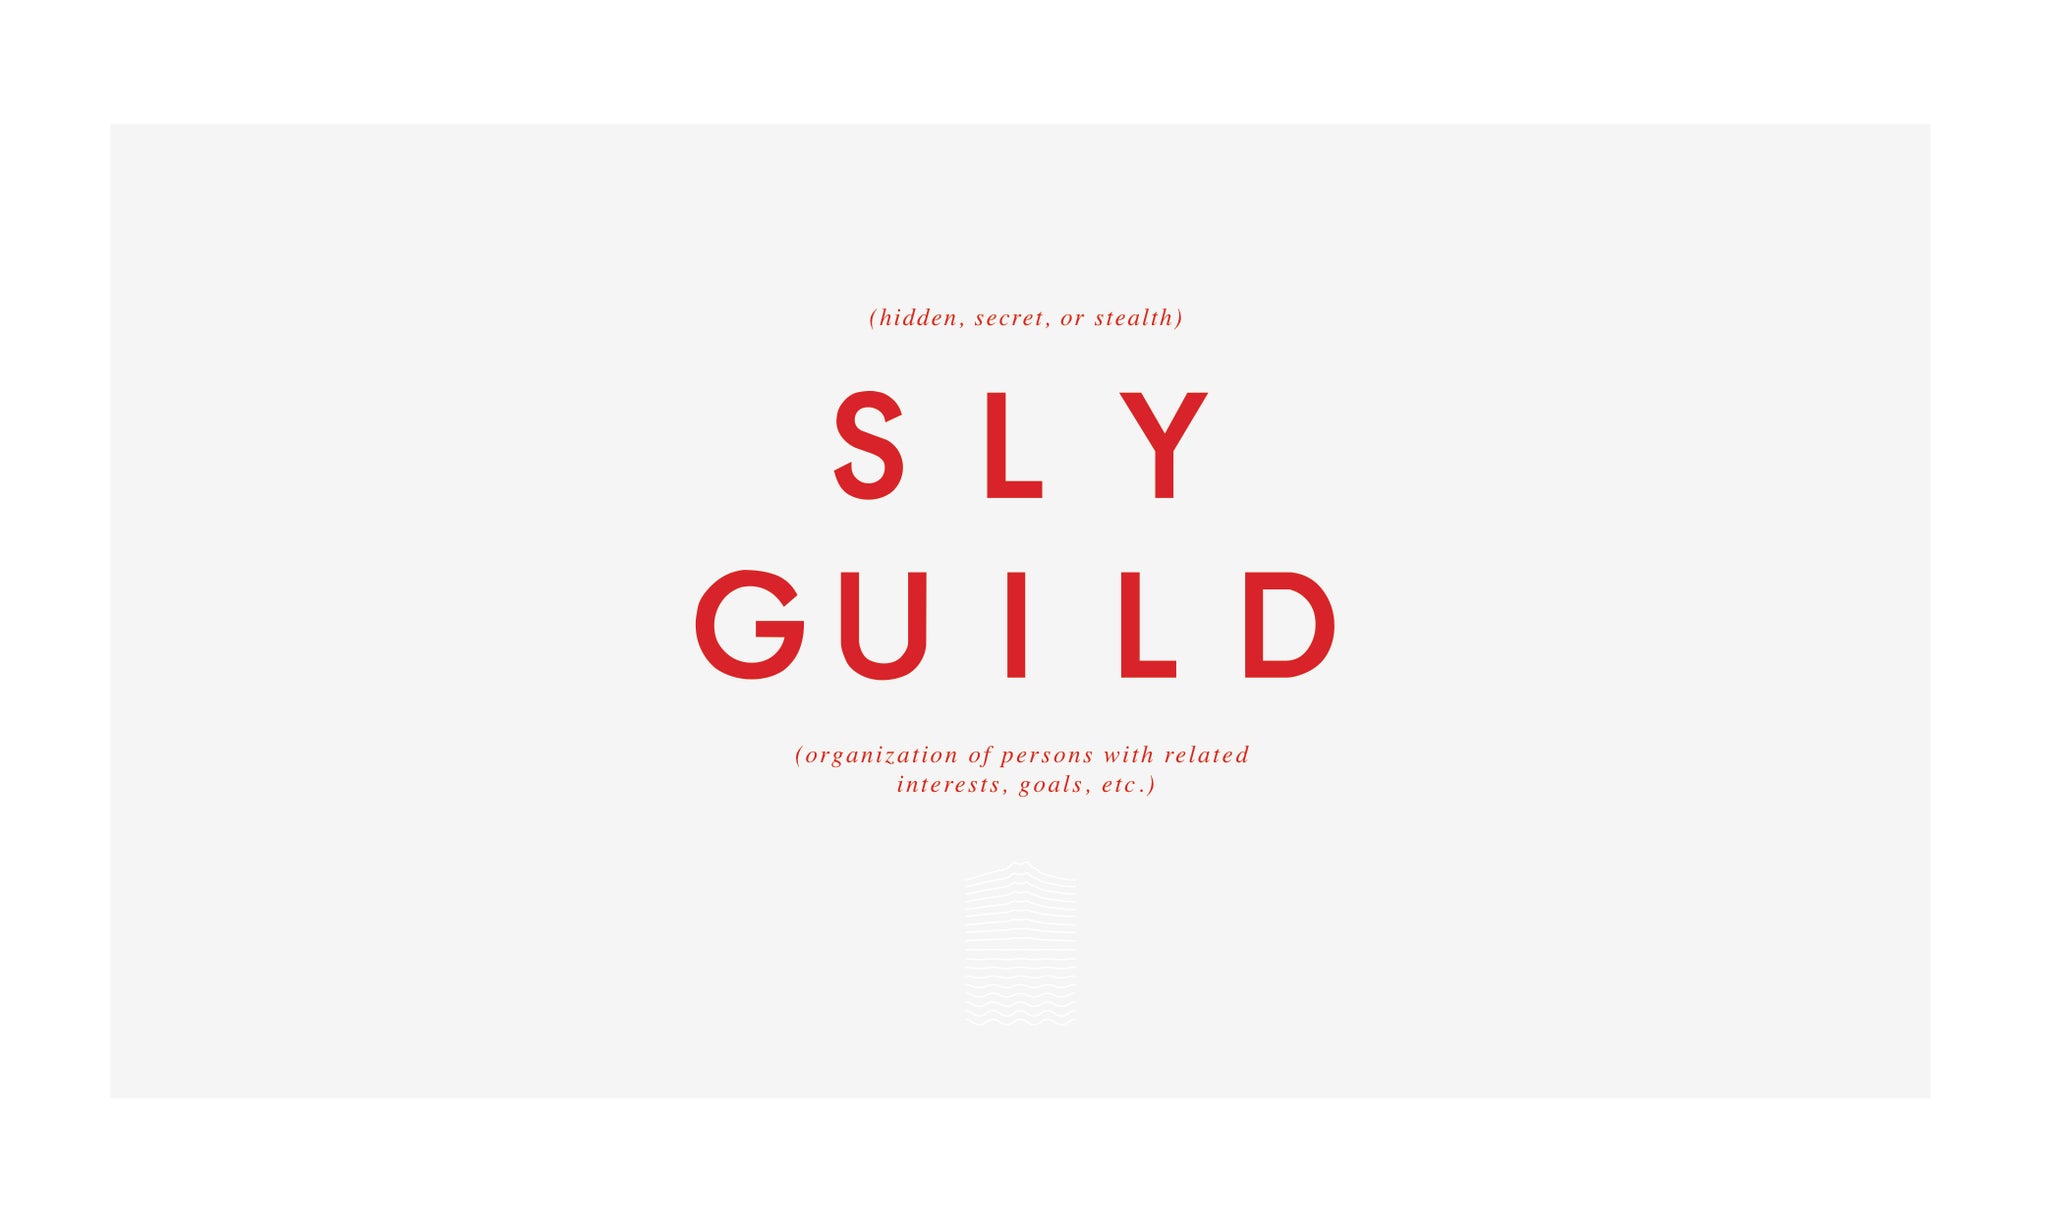 New Zealand and Australia Streetwear label Sly Guild